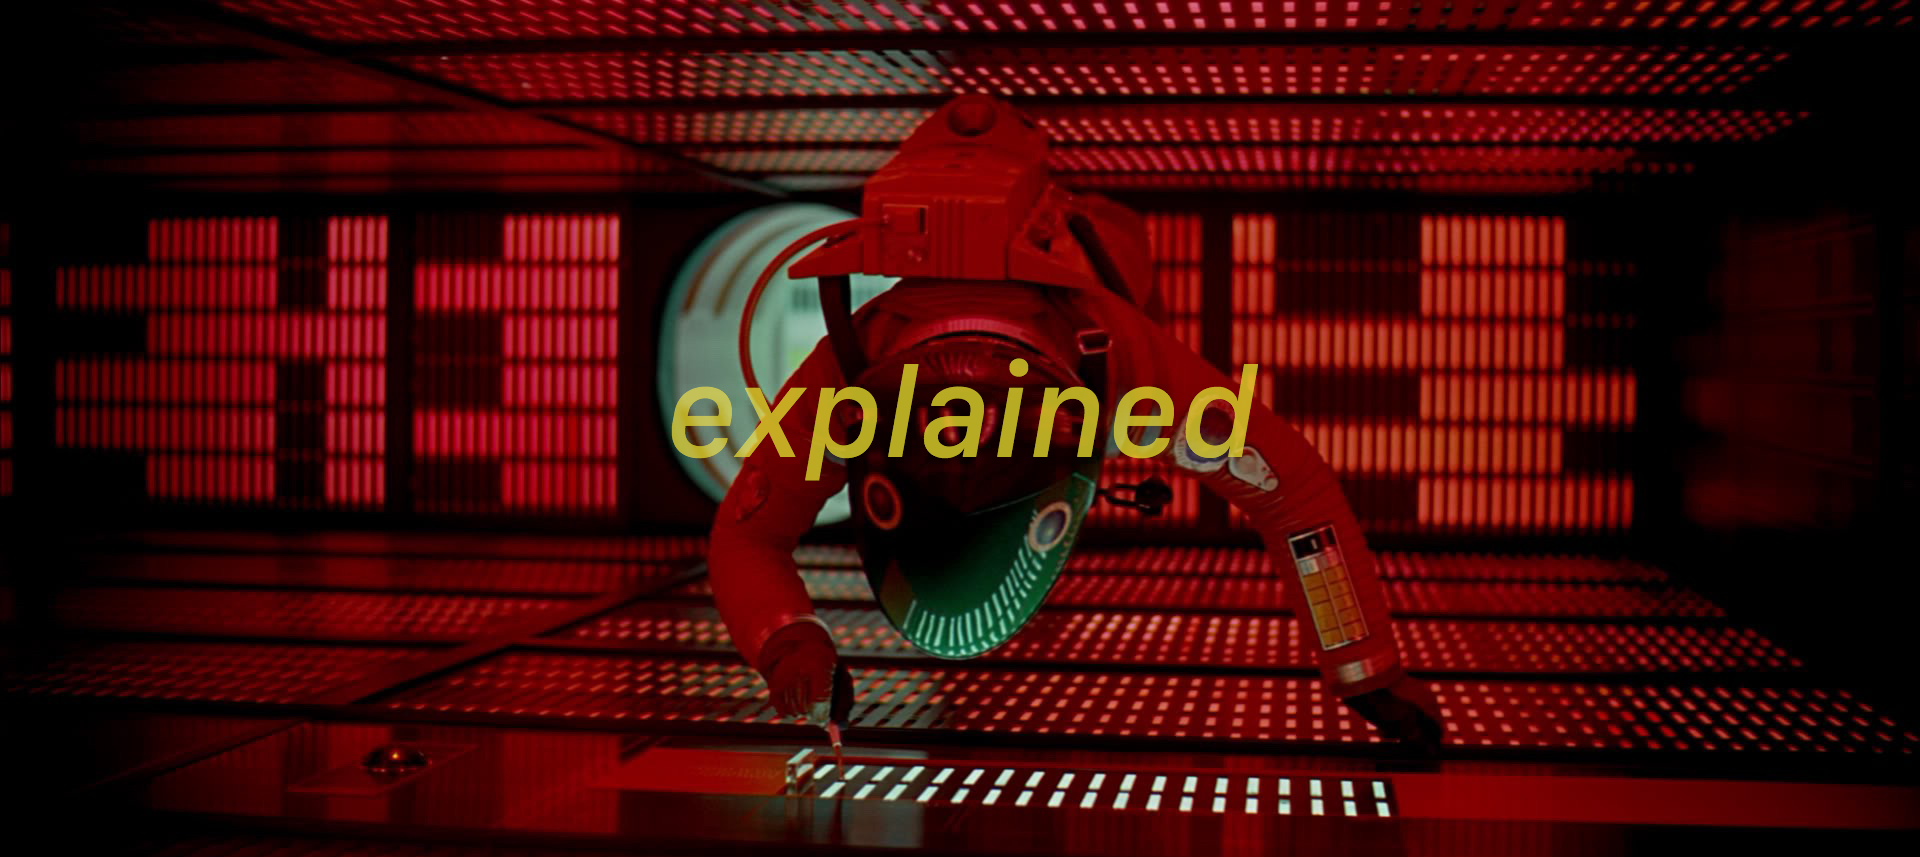 2001: A Space Odyssey — Explained, by Manny Rothman, rreview